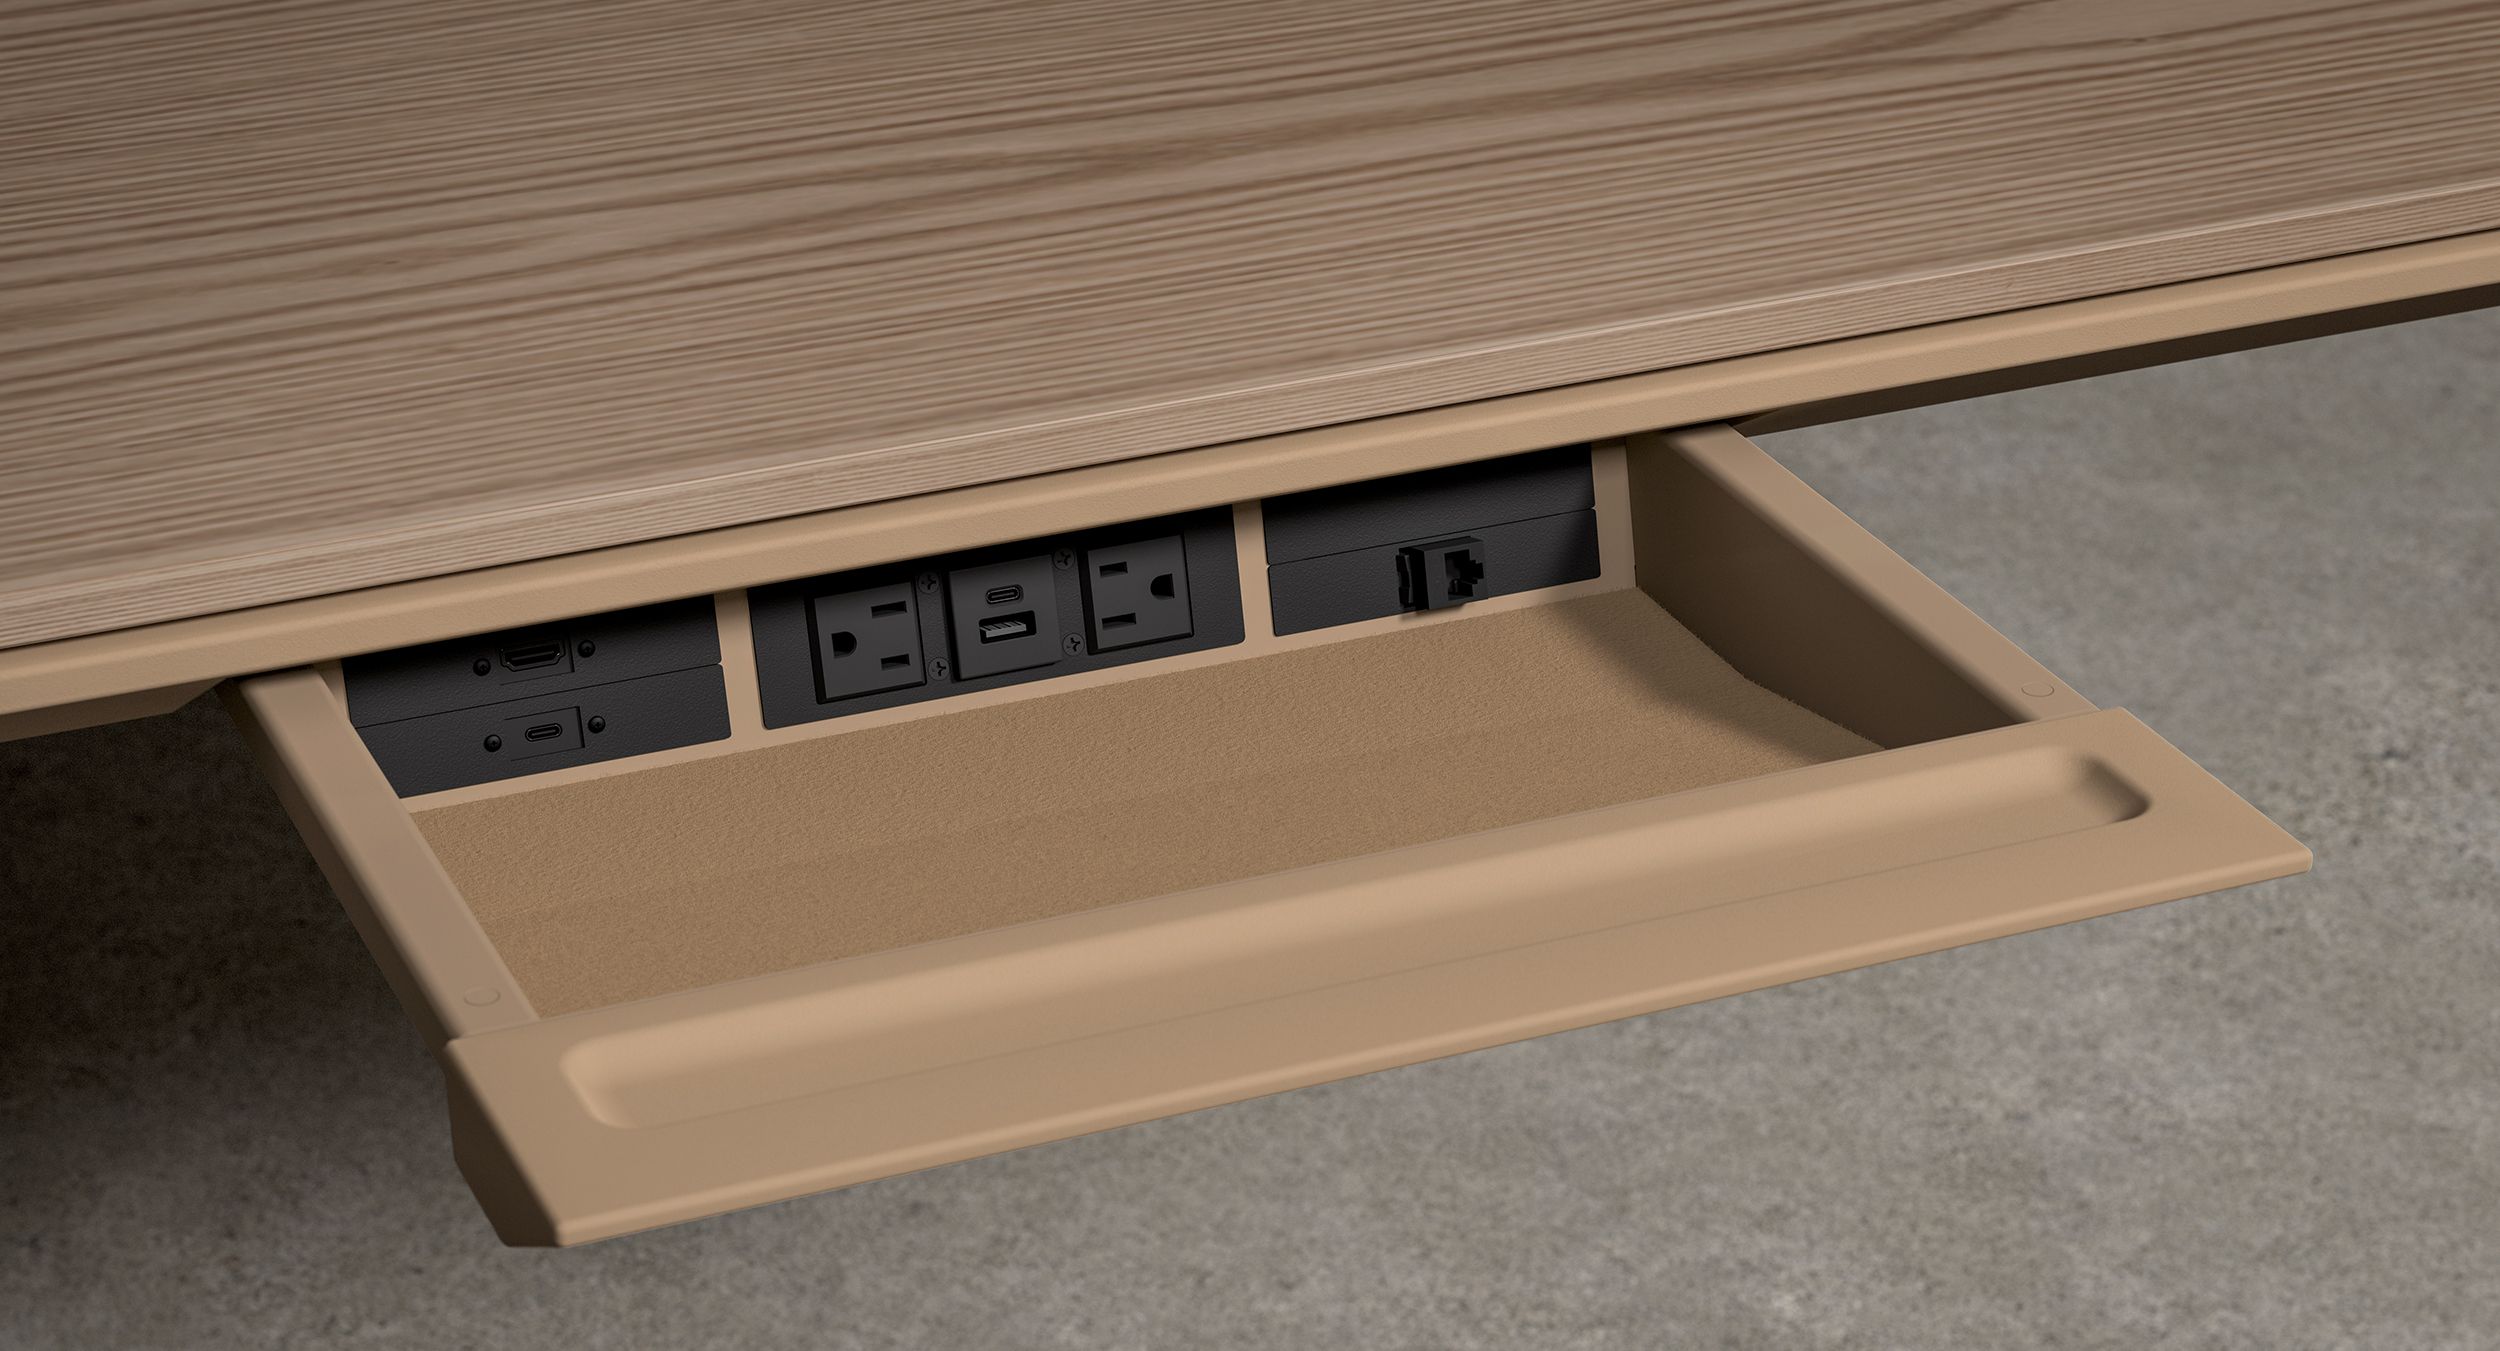 Halo perimeter power drawers are felt-lined with a durable, color-matched Halo soft front.